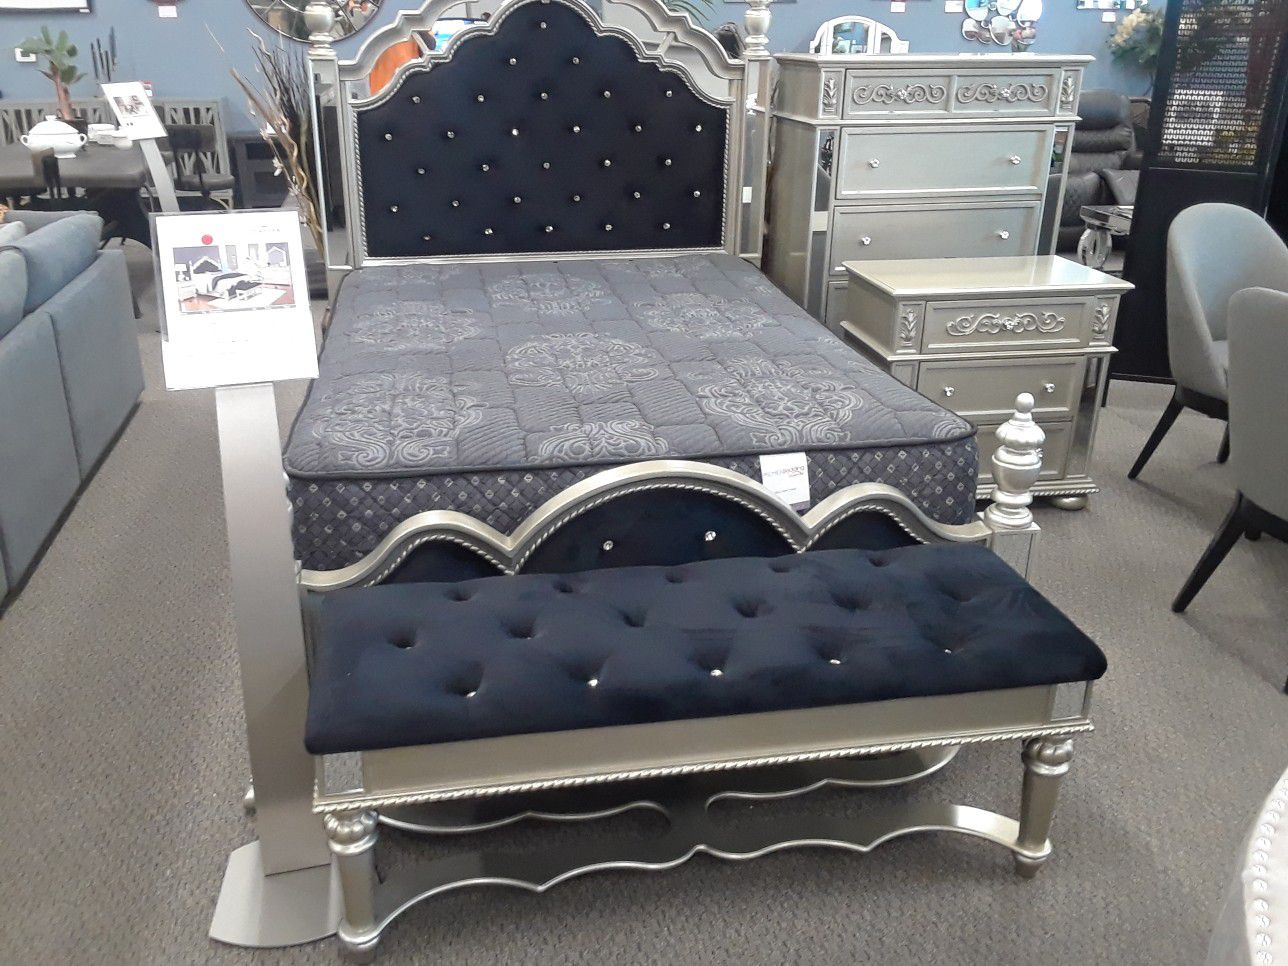 6 piece queen bedroom set comes with queen bed frame dresser mirror nightstand chest of drawer and trunk